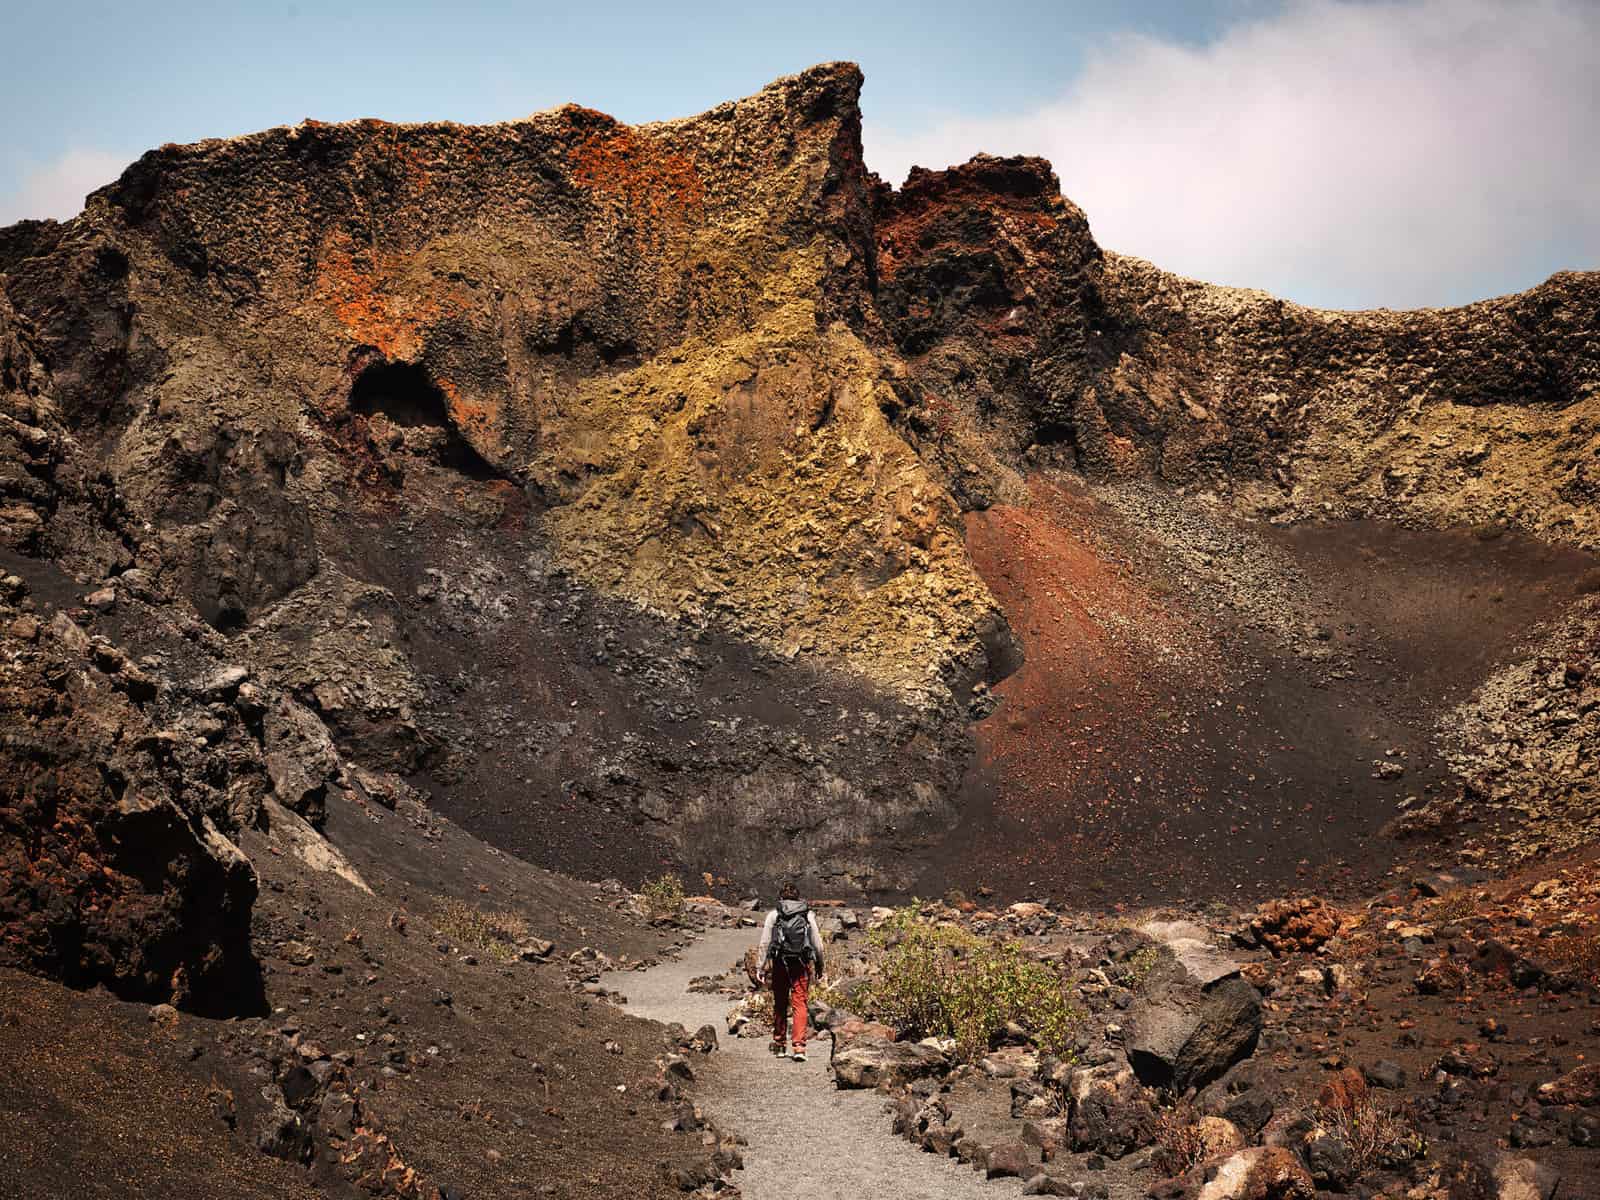 𝘐𝘮𝘢𝘨𝘦 𝘋𝘦𝘴𝘤𝘳𝘪𝘱𝘵𝘪𝘰𝘯: Matt walks along a path through a volcano - with oranges, reds, browns, greens and natural earthy coloured rocks all around him. ⁣